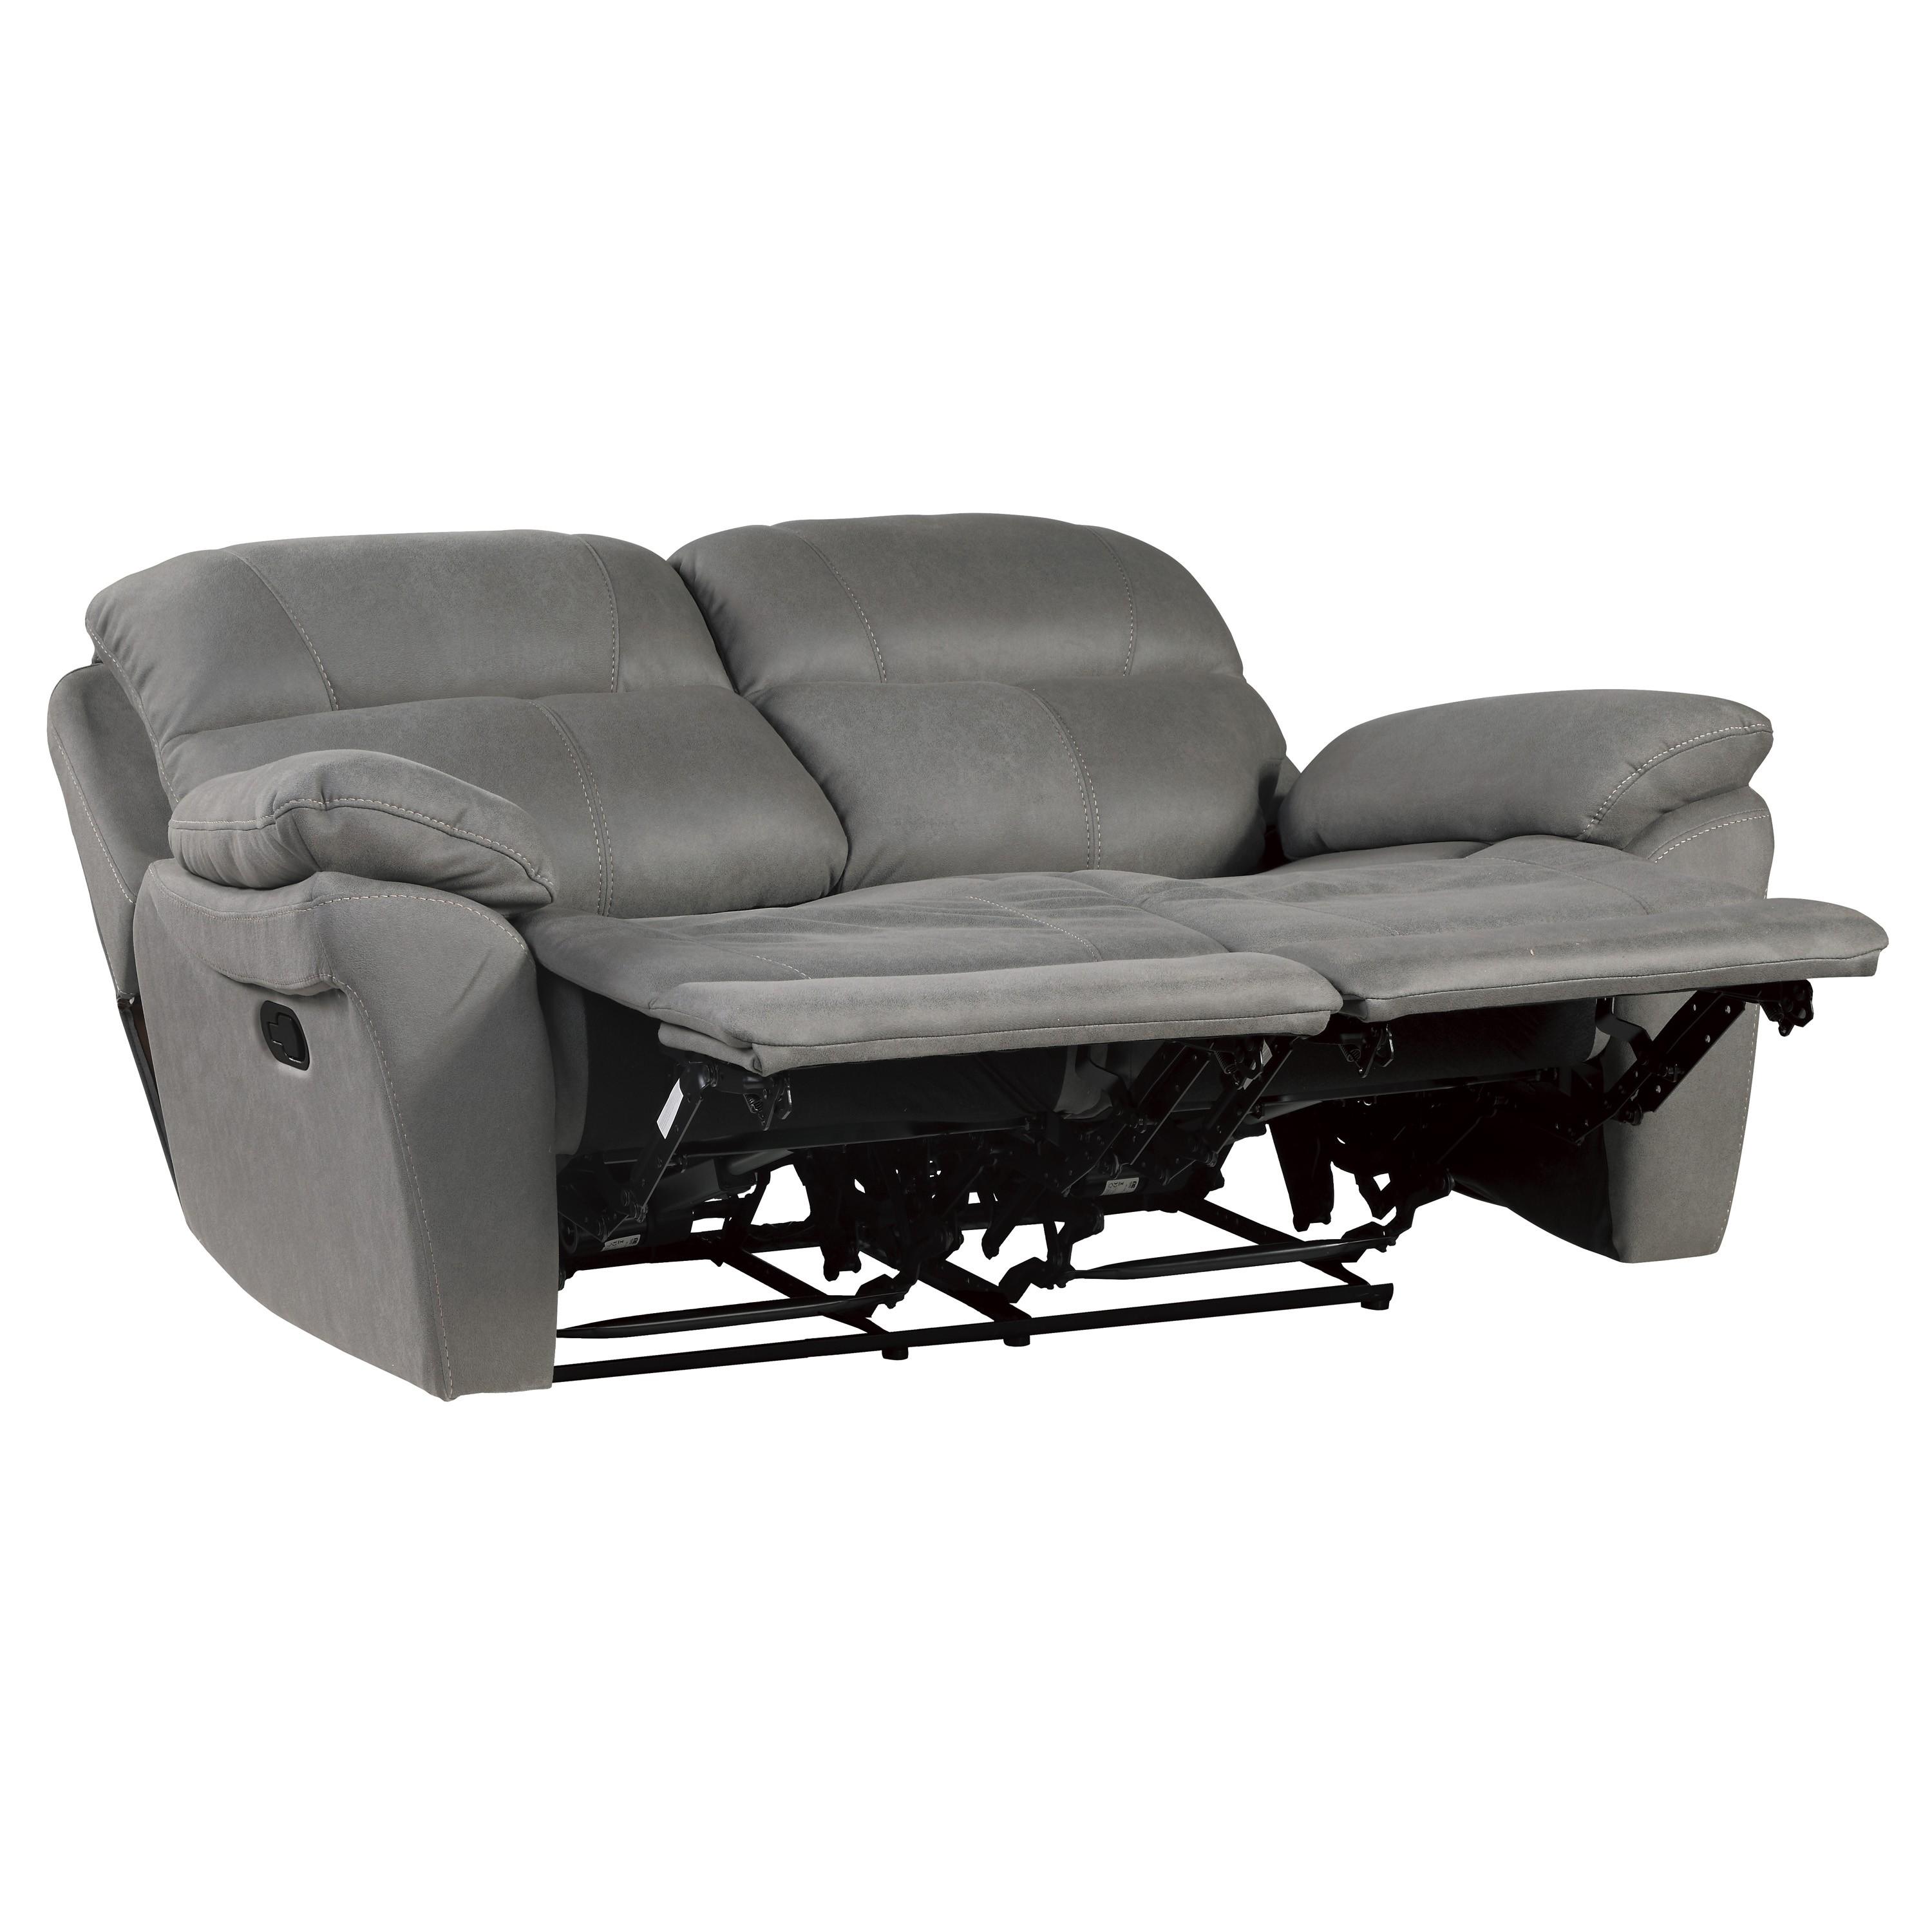 

    
Homelegance 9580GY-2 Longvale Reclining Loveseat Gray 9580GY-2
